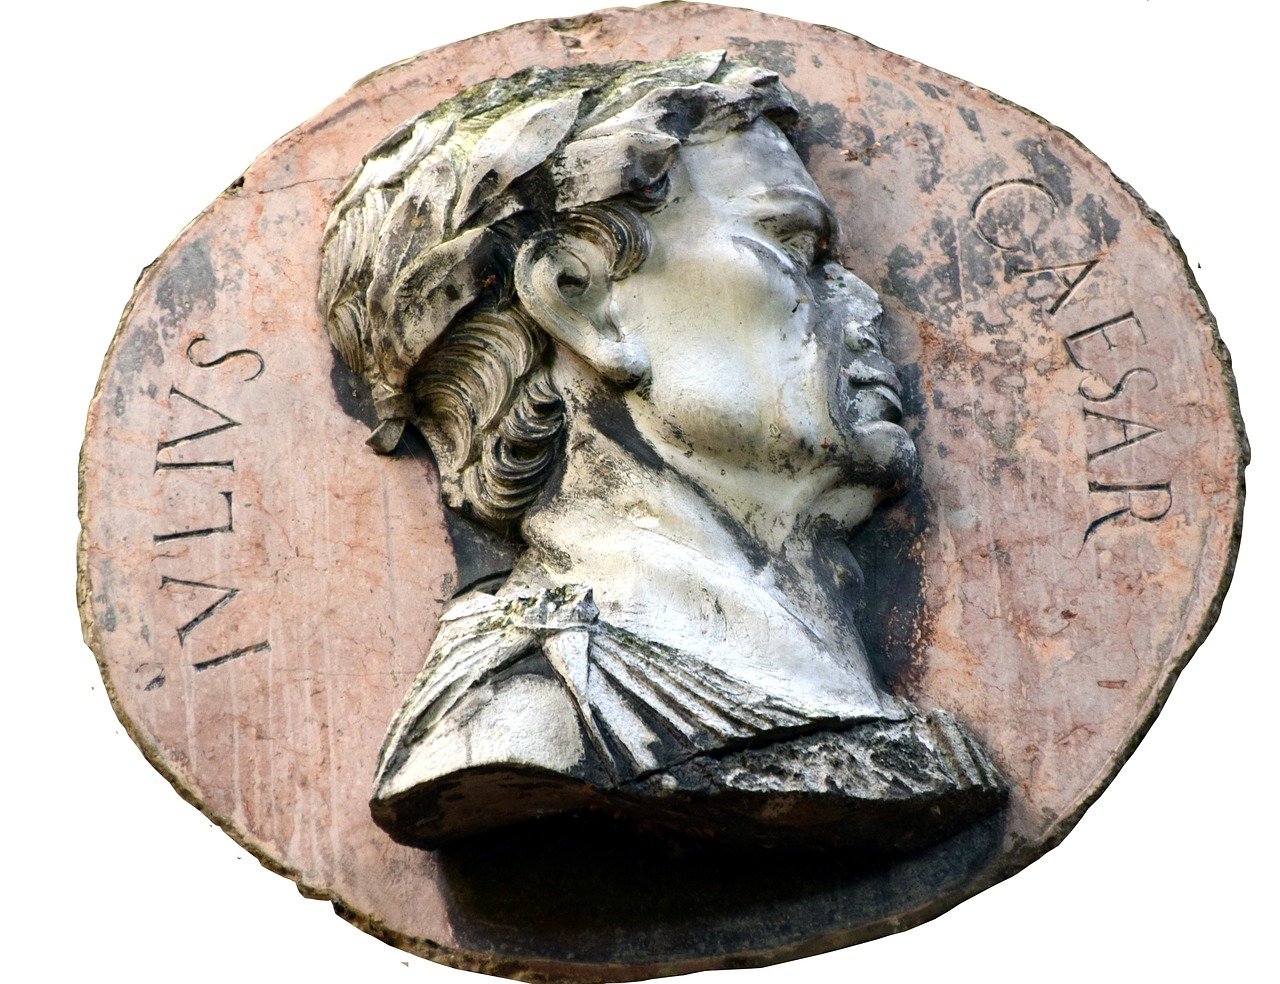 Caesar's head on a round background simulating a coin